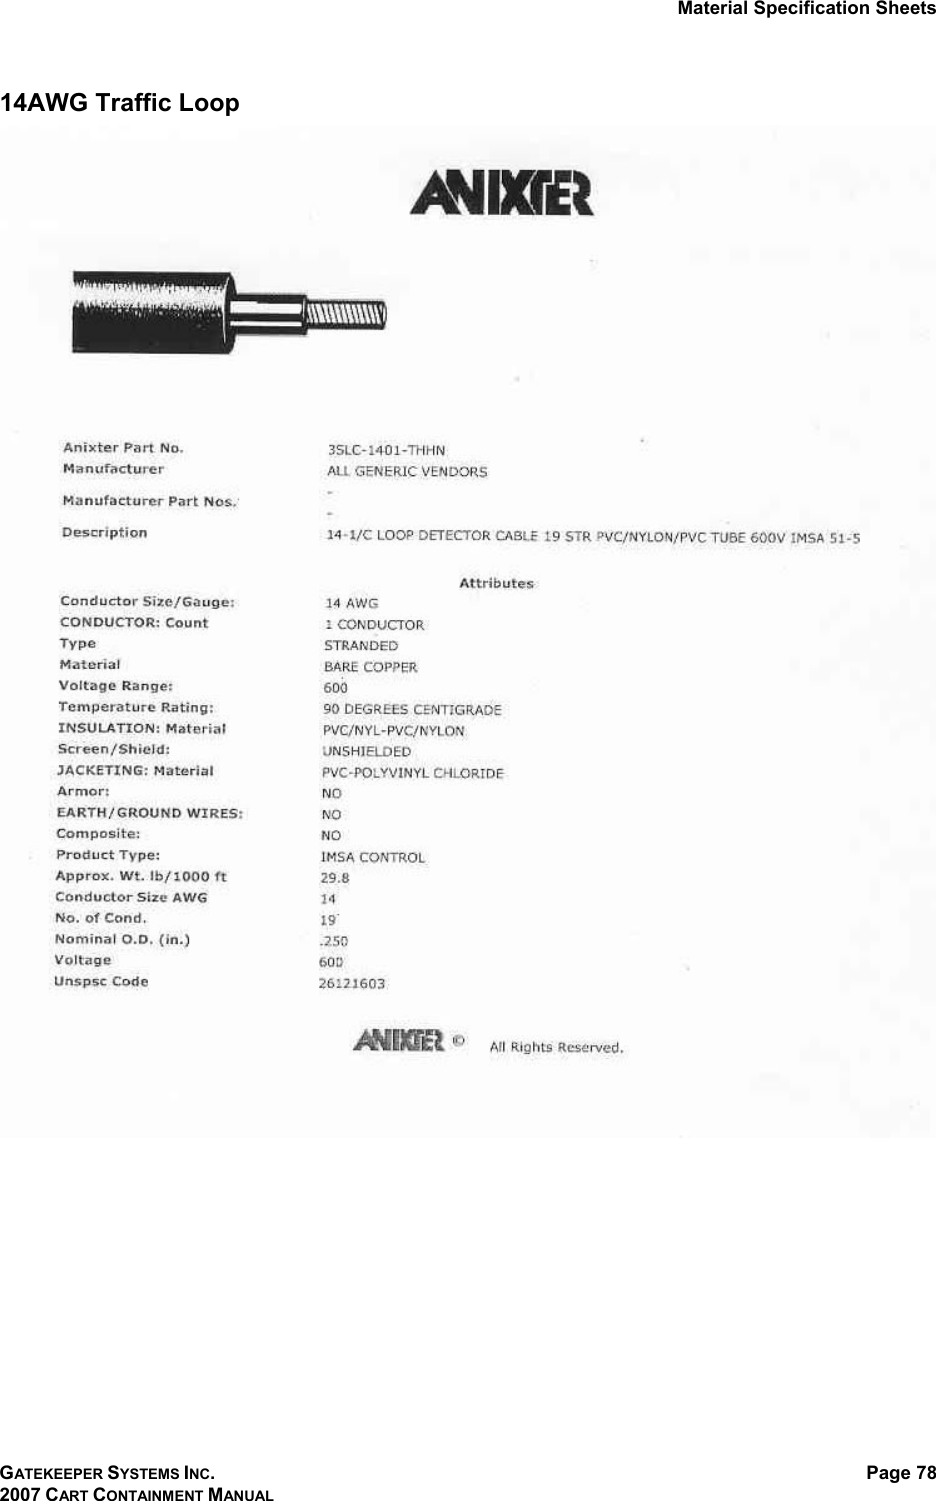 Material Specification Sheets GATEKEEPER SYSTEMS INC. 2007 CART CONTAINMENT MANUAL Page 78  14AWG Traffic Loop   